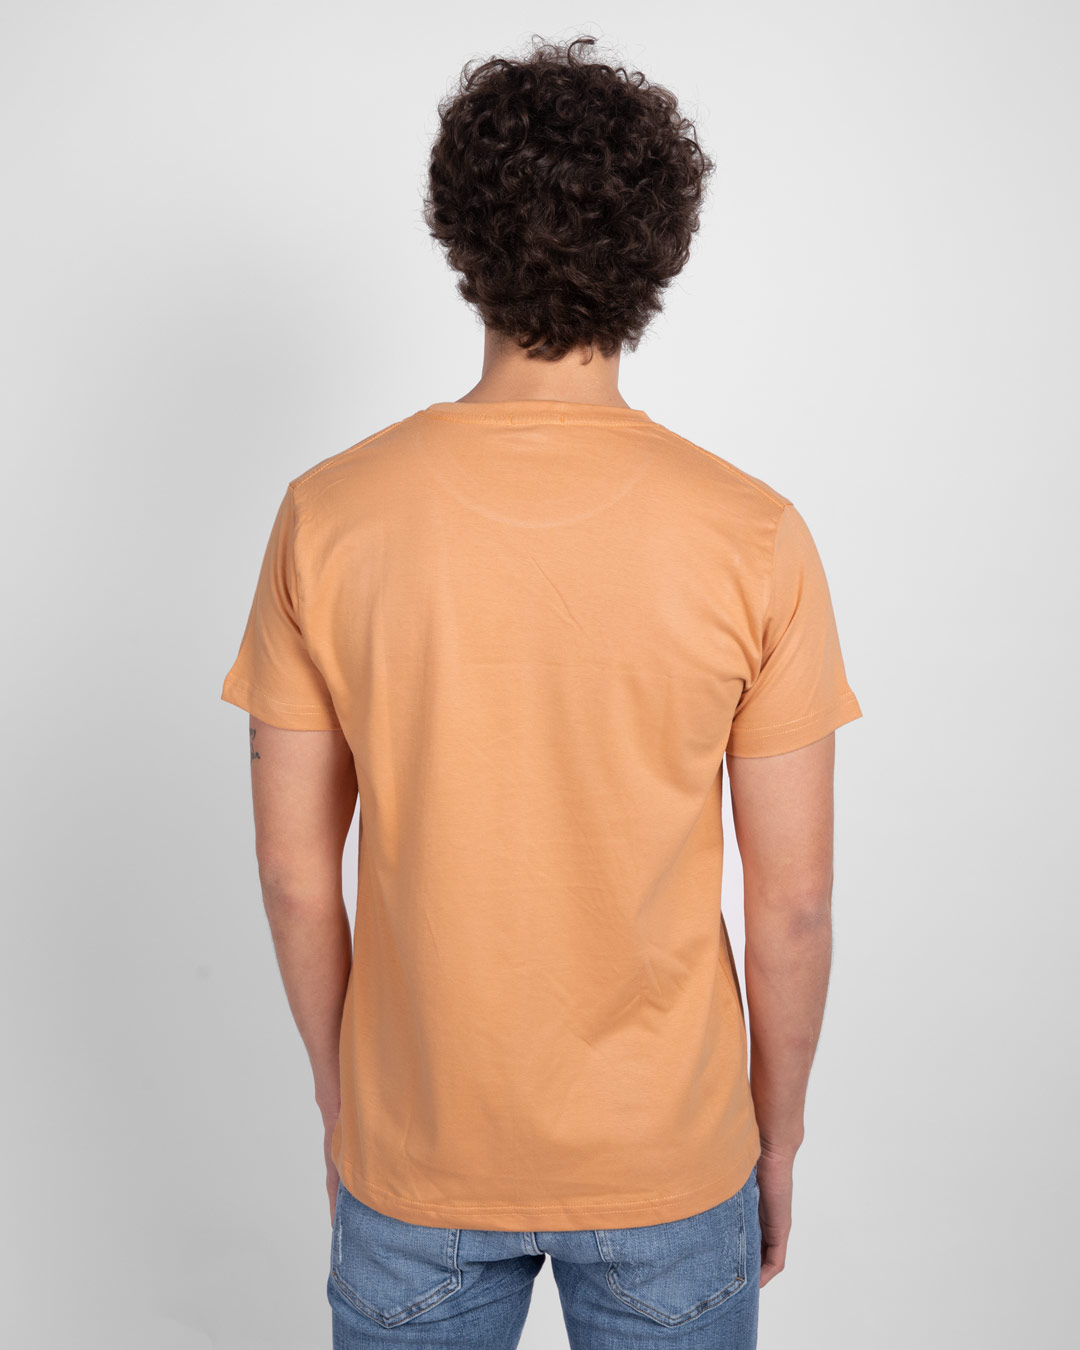 Shop Stay Home And Chill Half Sleeve T-Shirt Apricot Orange-Back